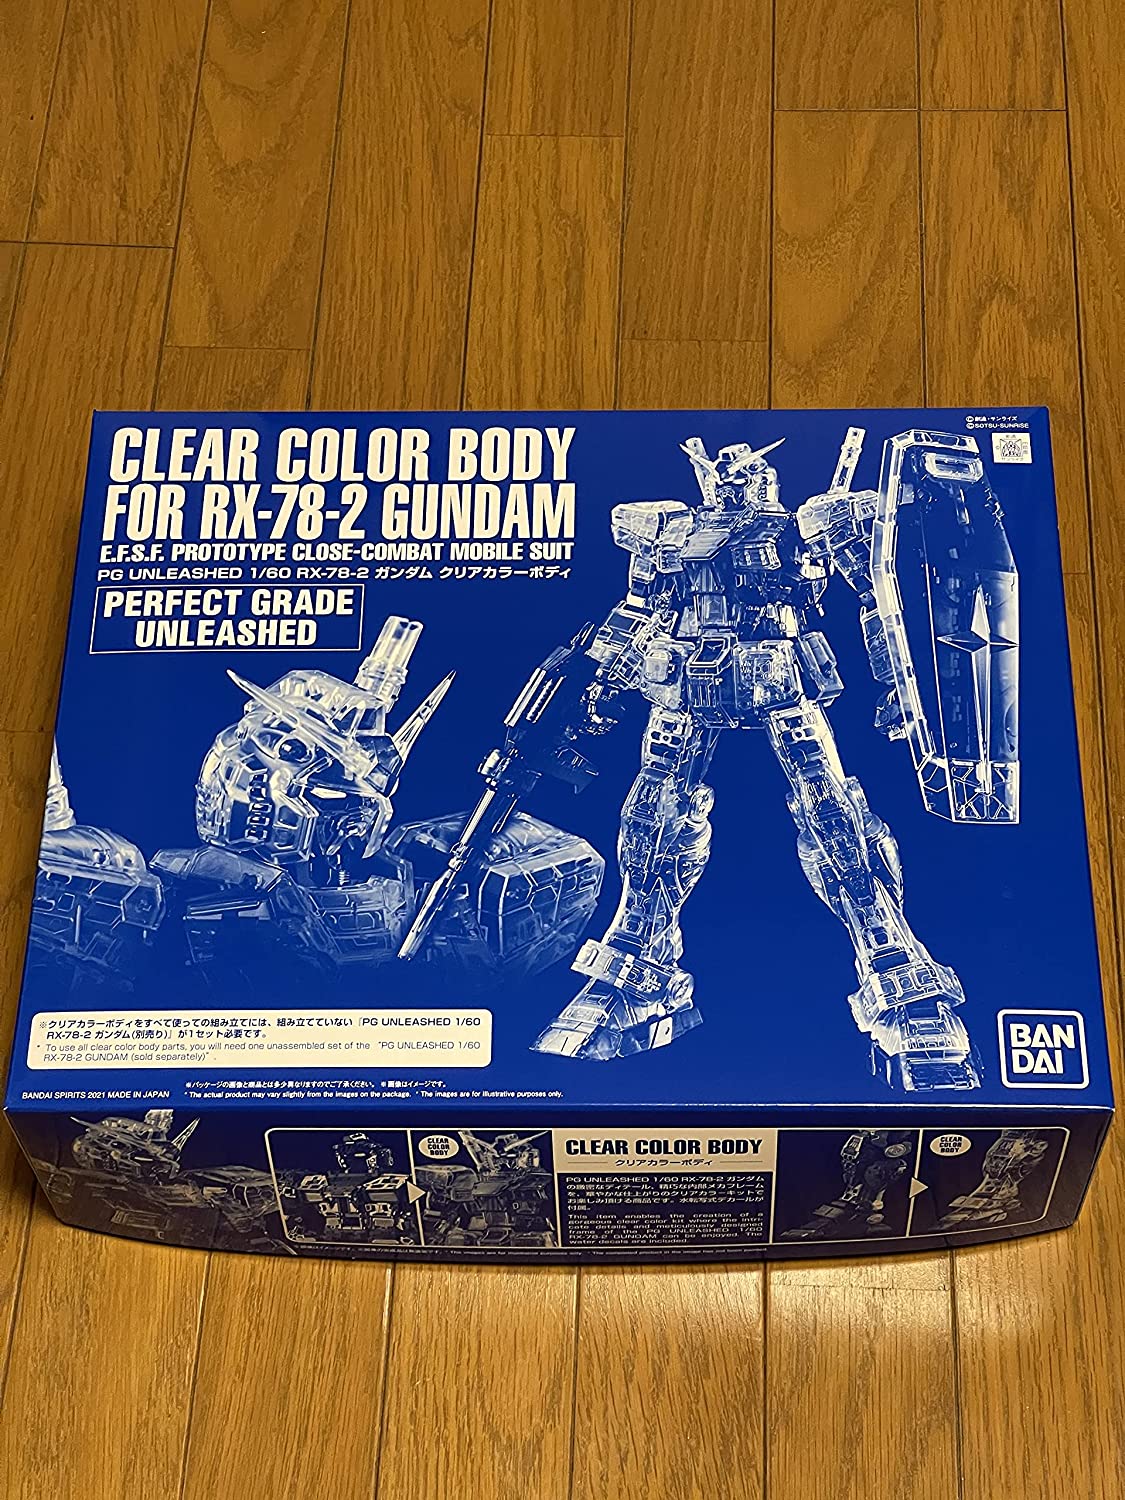 PG UNLEASHED 1/60 RX-78-2 Gundam Clear Color Body - Discovery